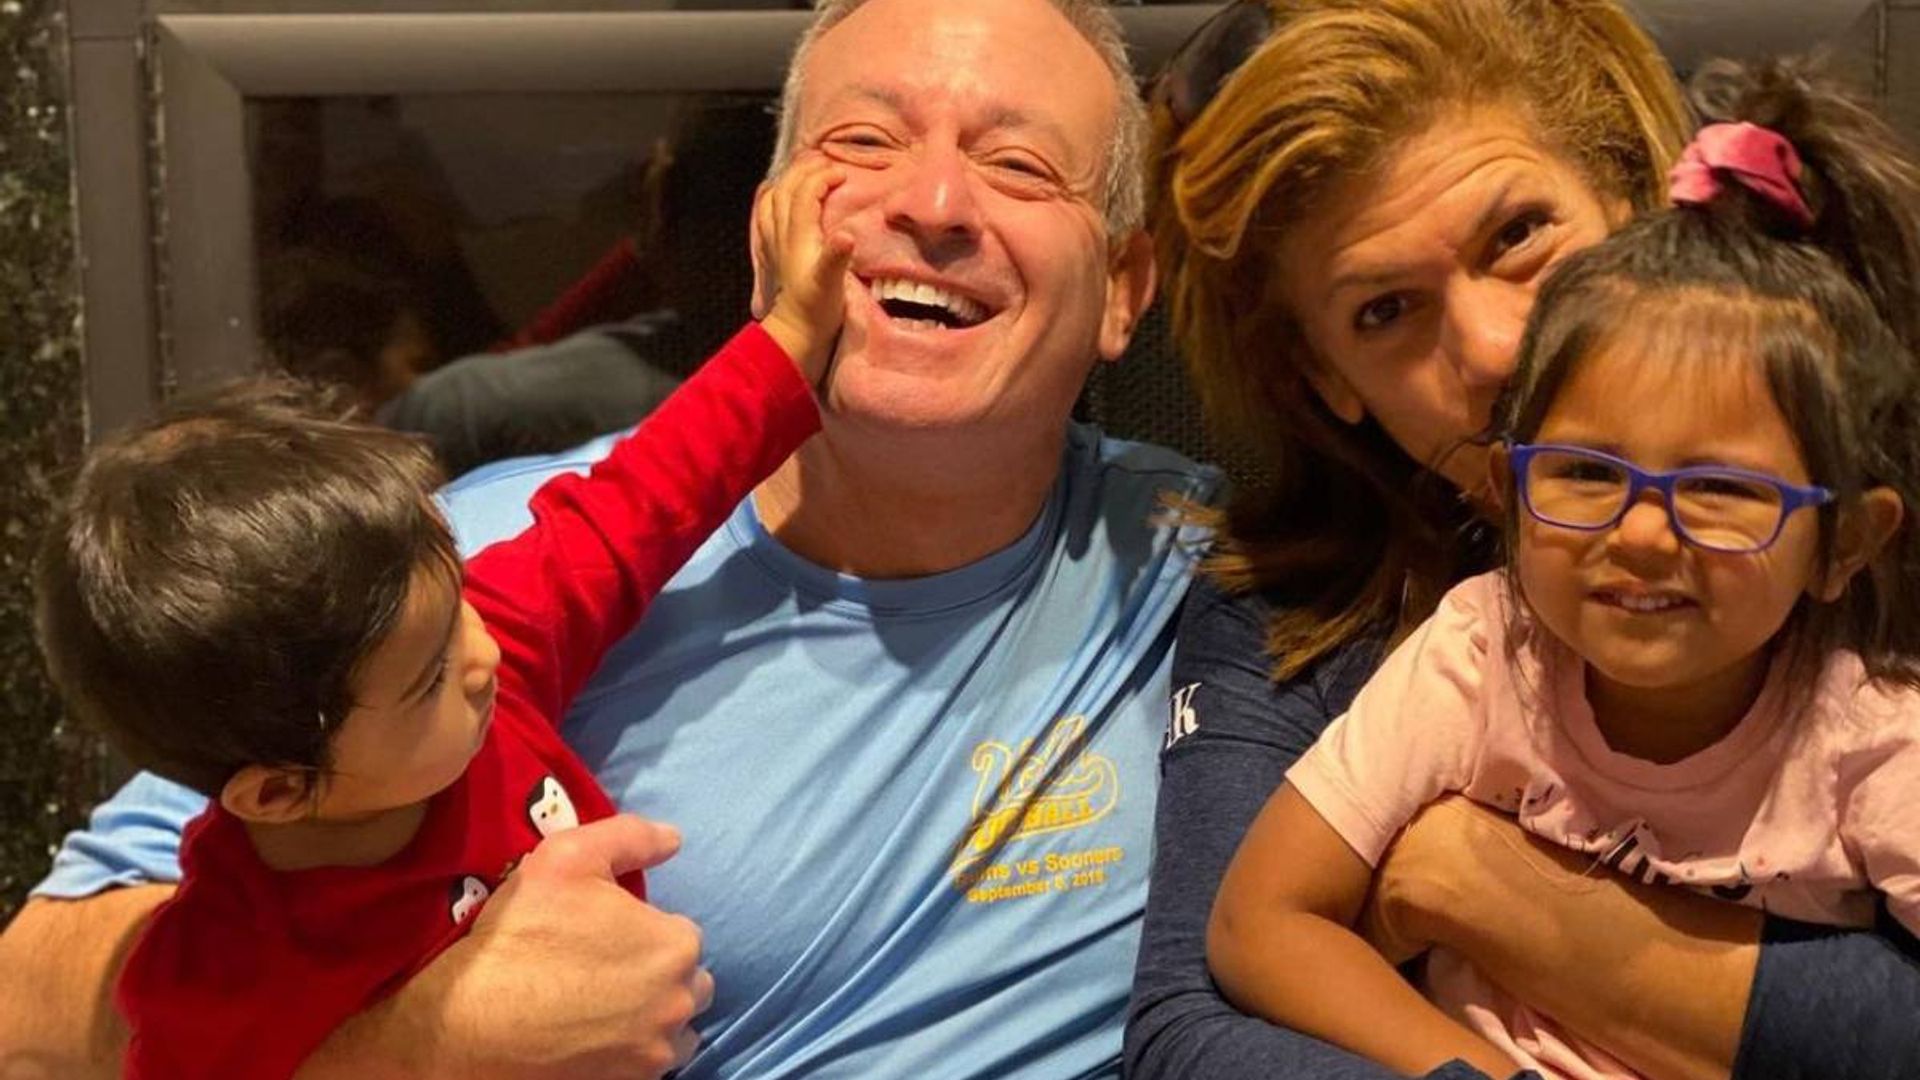 Hoda Kotb makes emotional discovery about her daughter during time apart